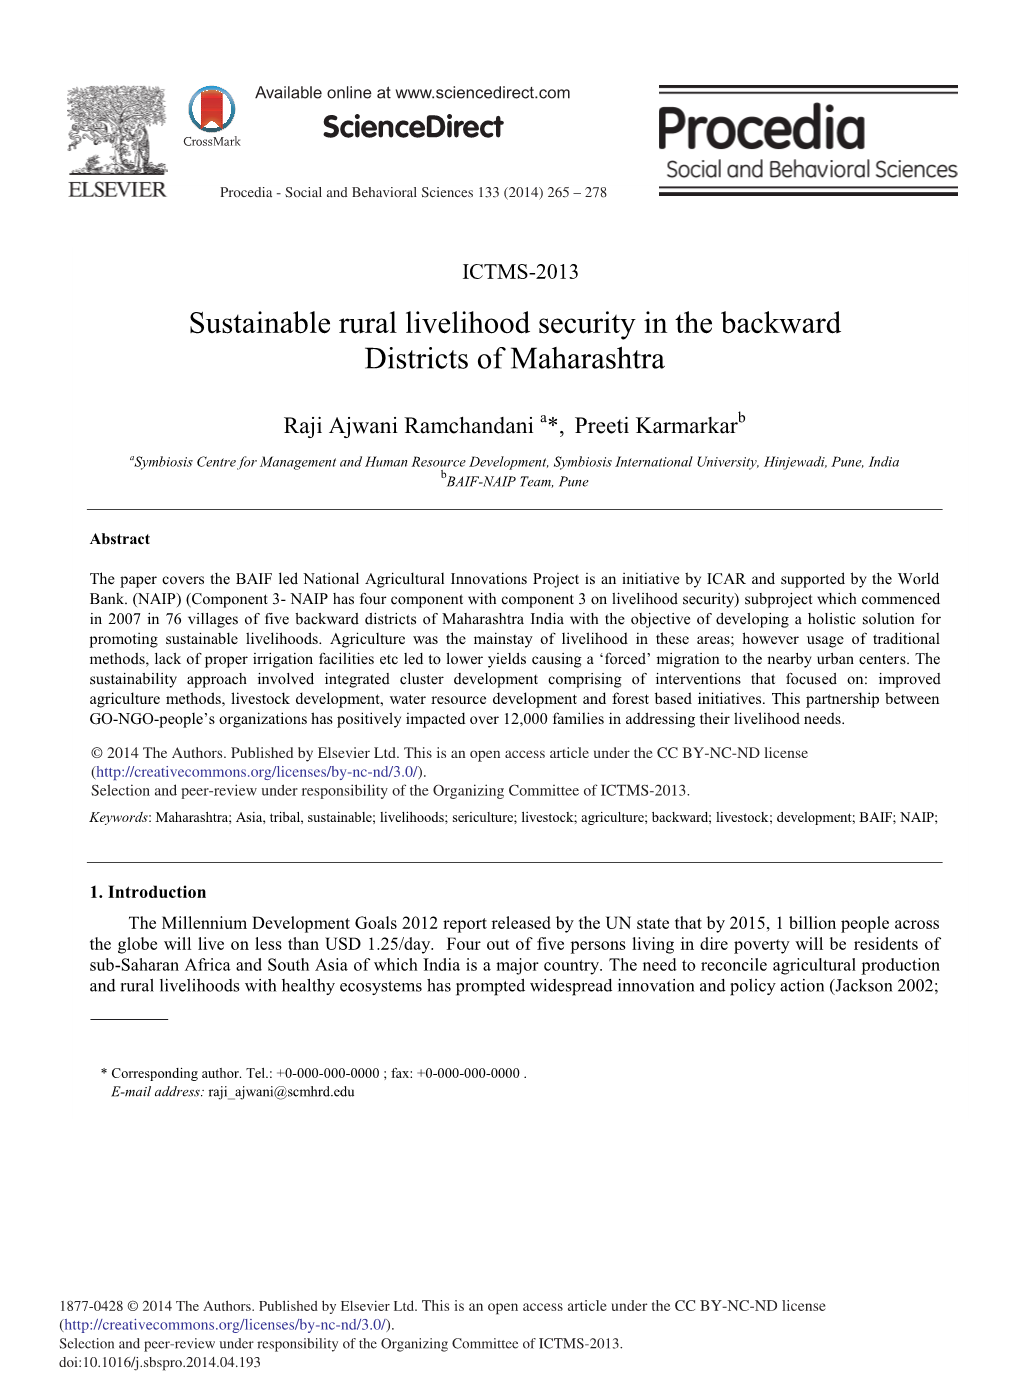 Sustainable Rural Livelihood Security in the Backward Districts of Maharashtra